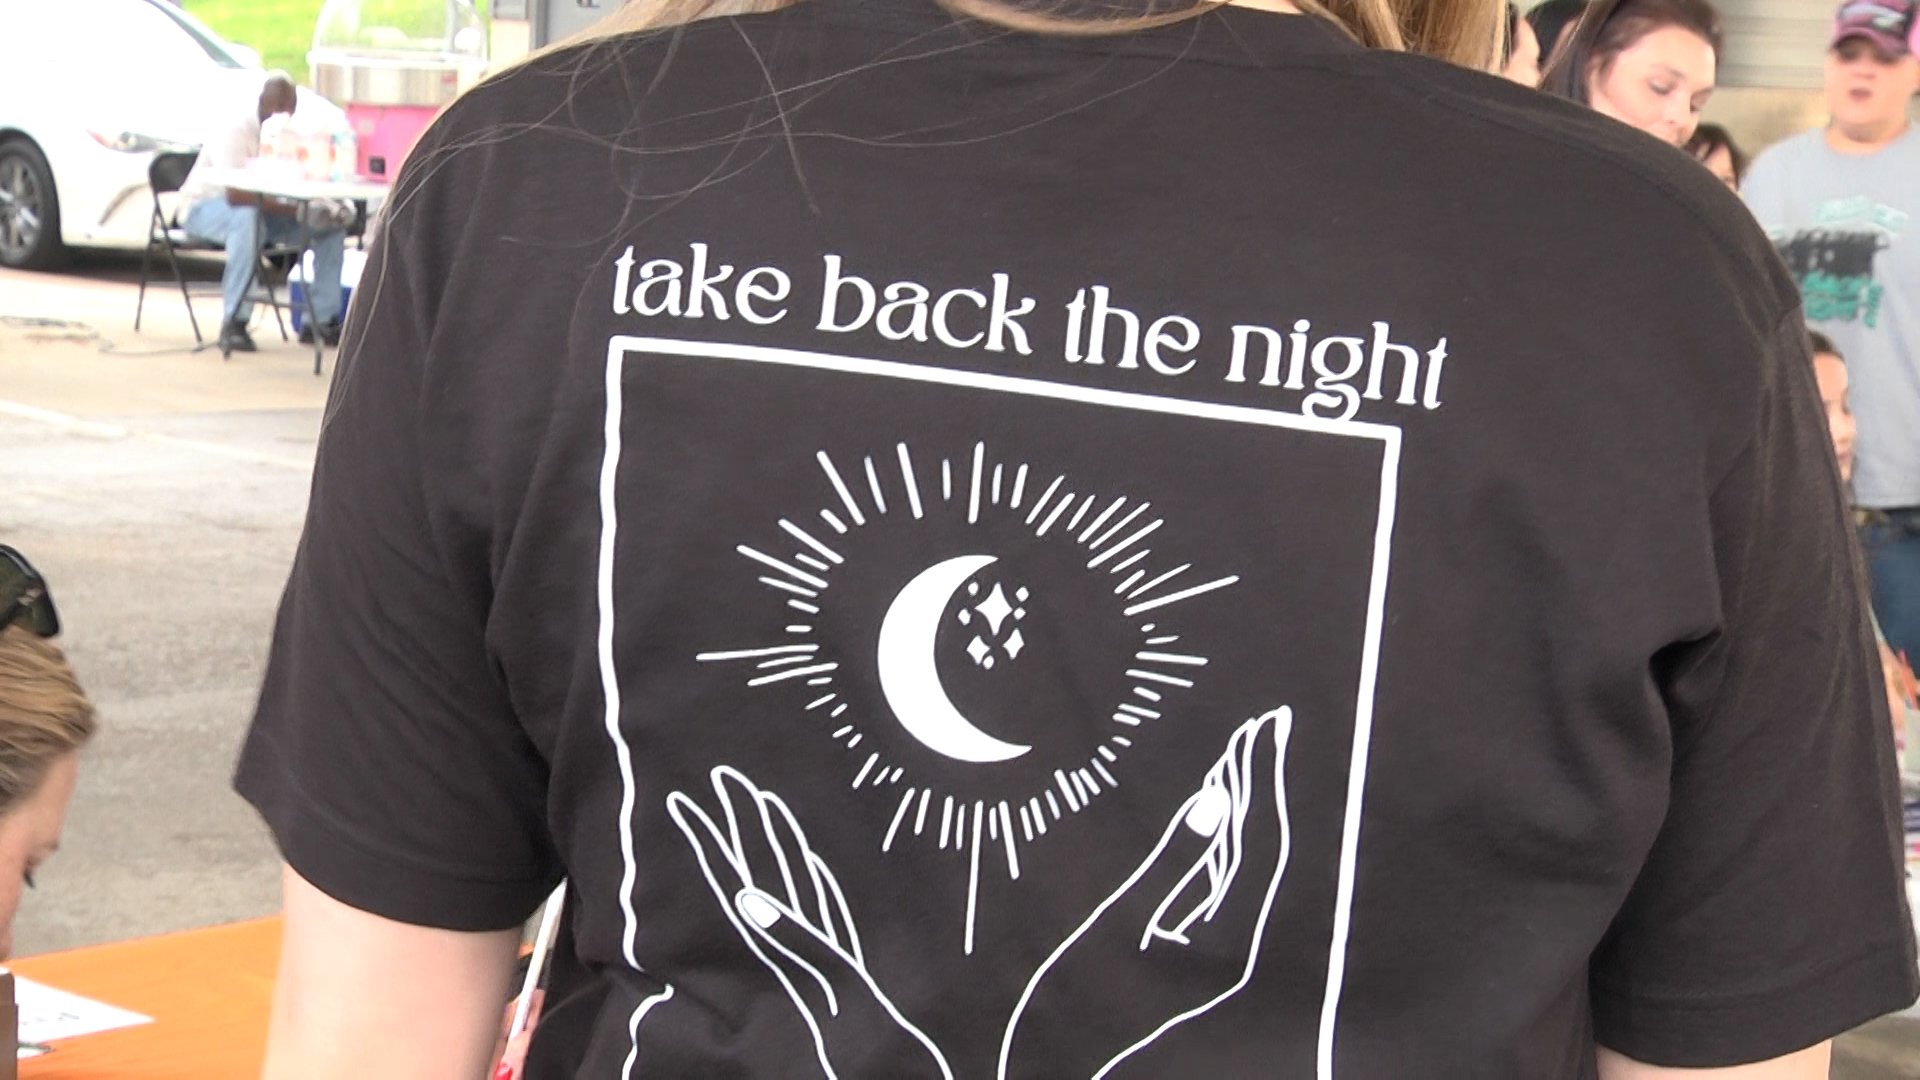 Take Back the Night raises awareness for sexual assault WNKY News 40